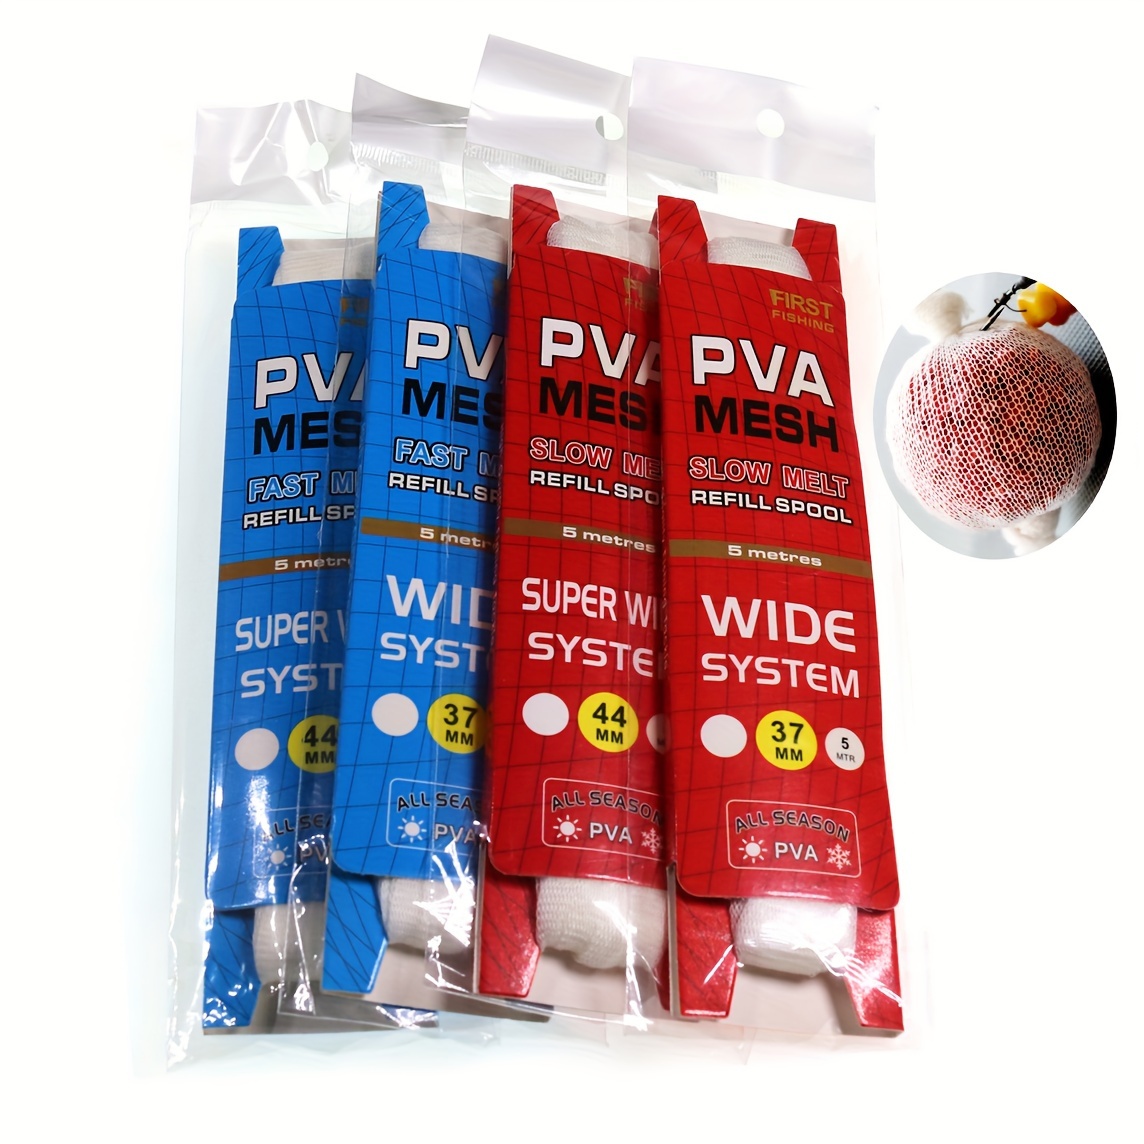 pva fishing net, pva fishing net Suppliers and Manufacturers at